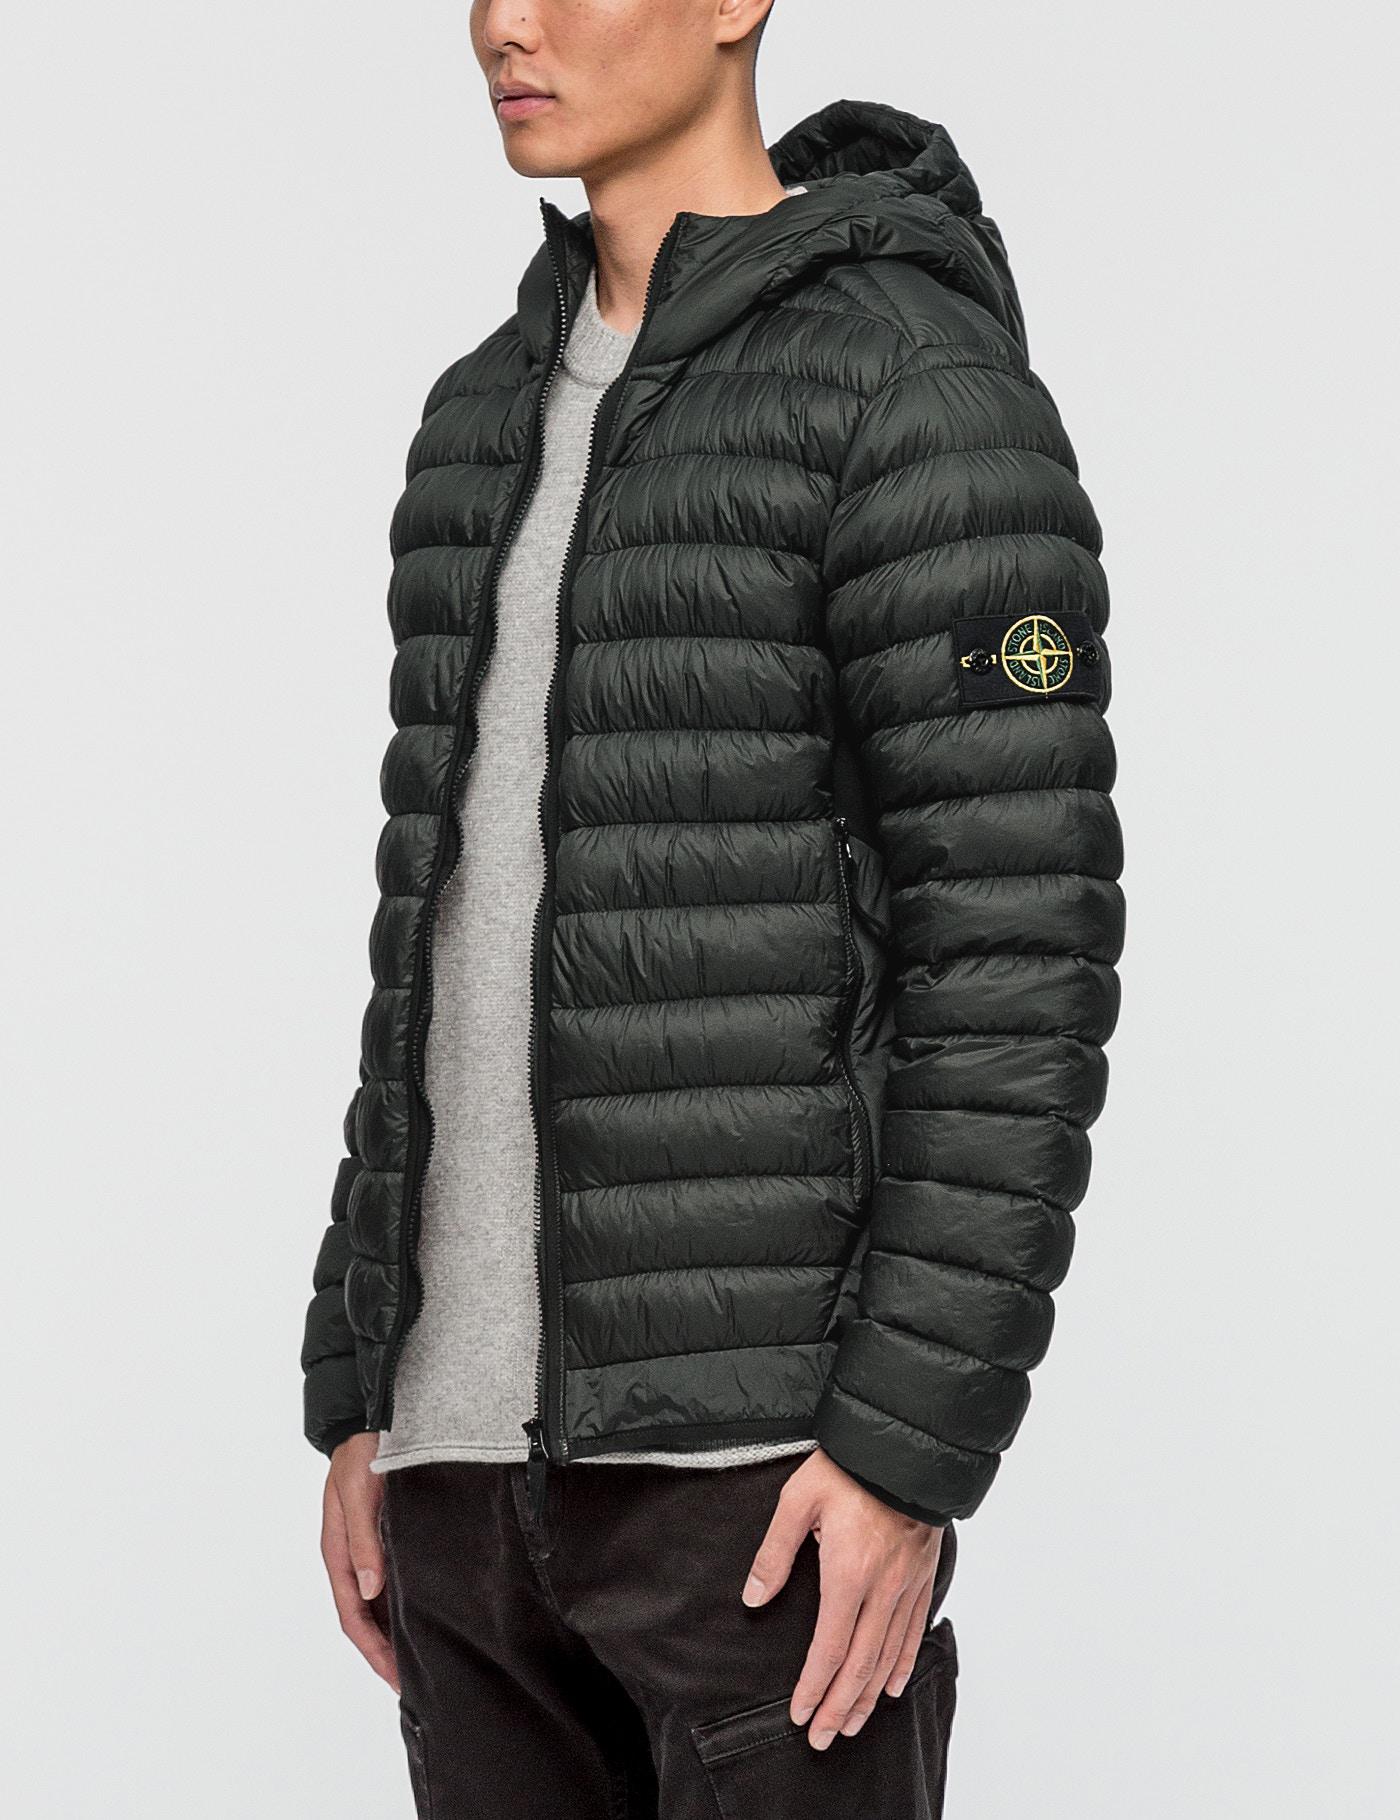 stone island dyed down jacket,www.autoconnective.in